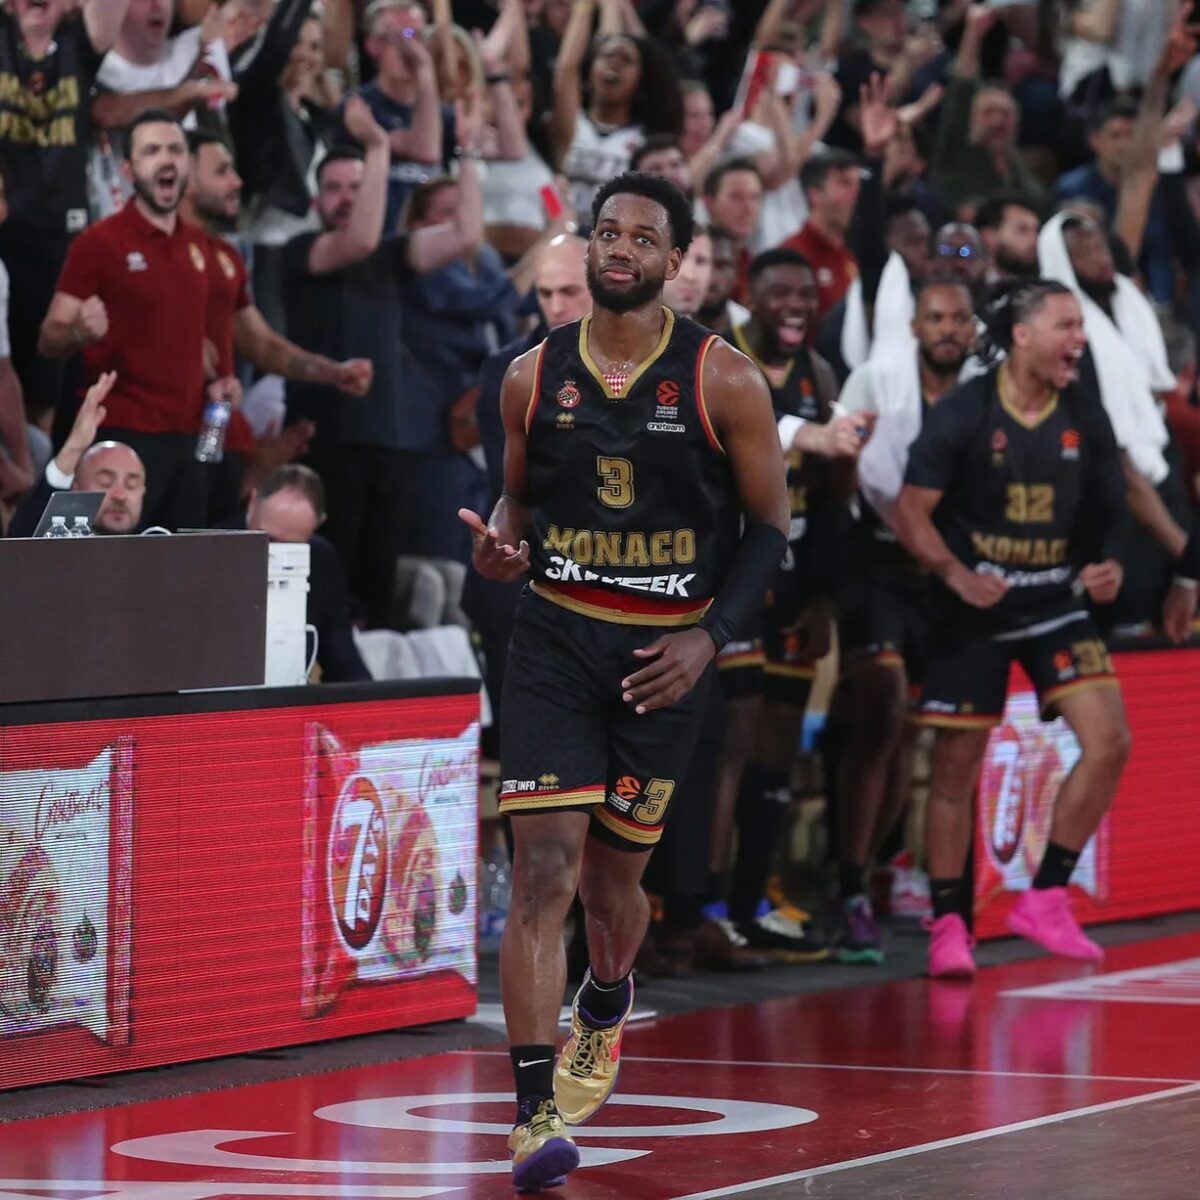 Jordan Loyd and Mike James are back for Sasa Obradovic, while Kemba Walker has arrived, but can AS Monaco claim glory in Euroleague Basketball?